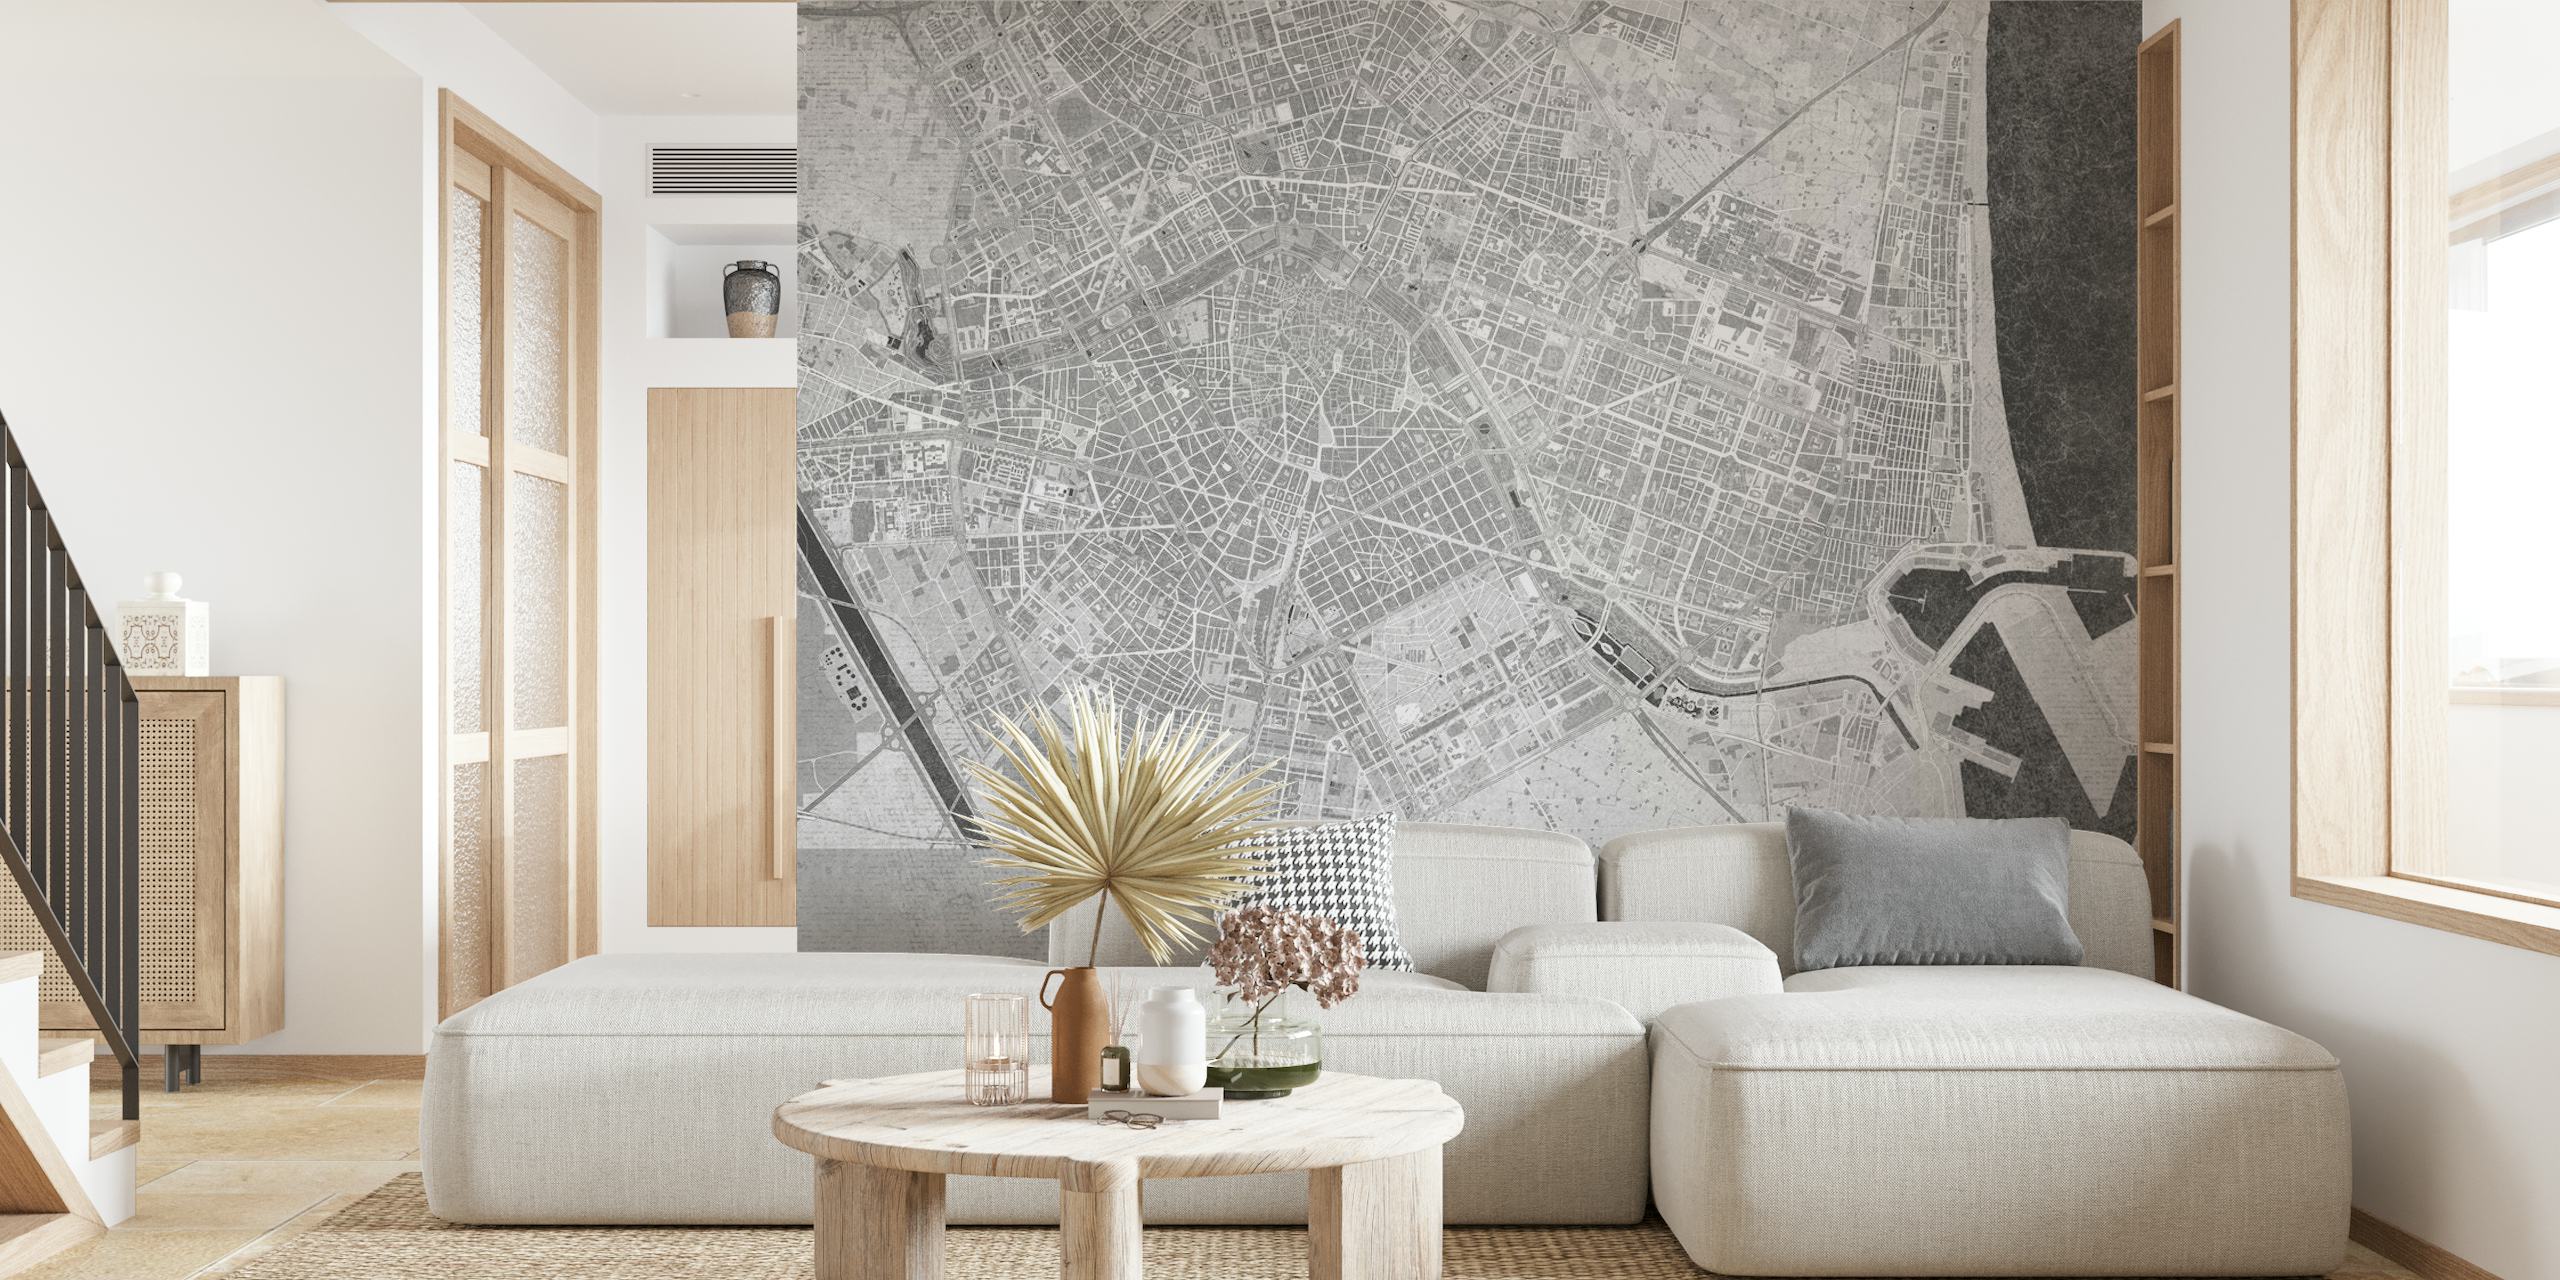 Black and white map of Valencia, Spain wall mural